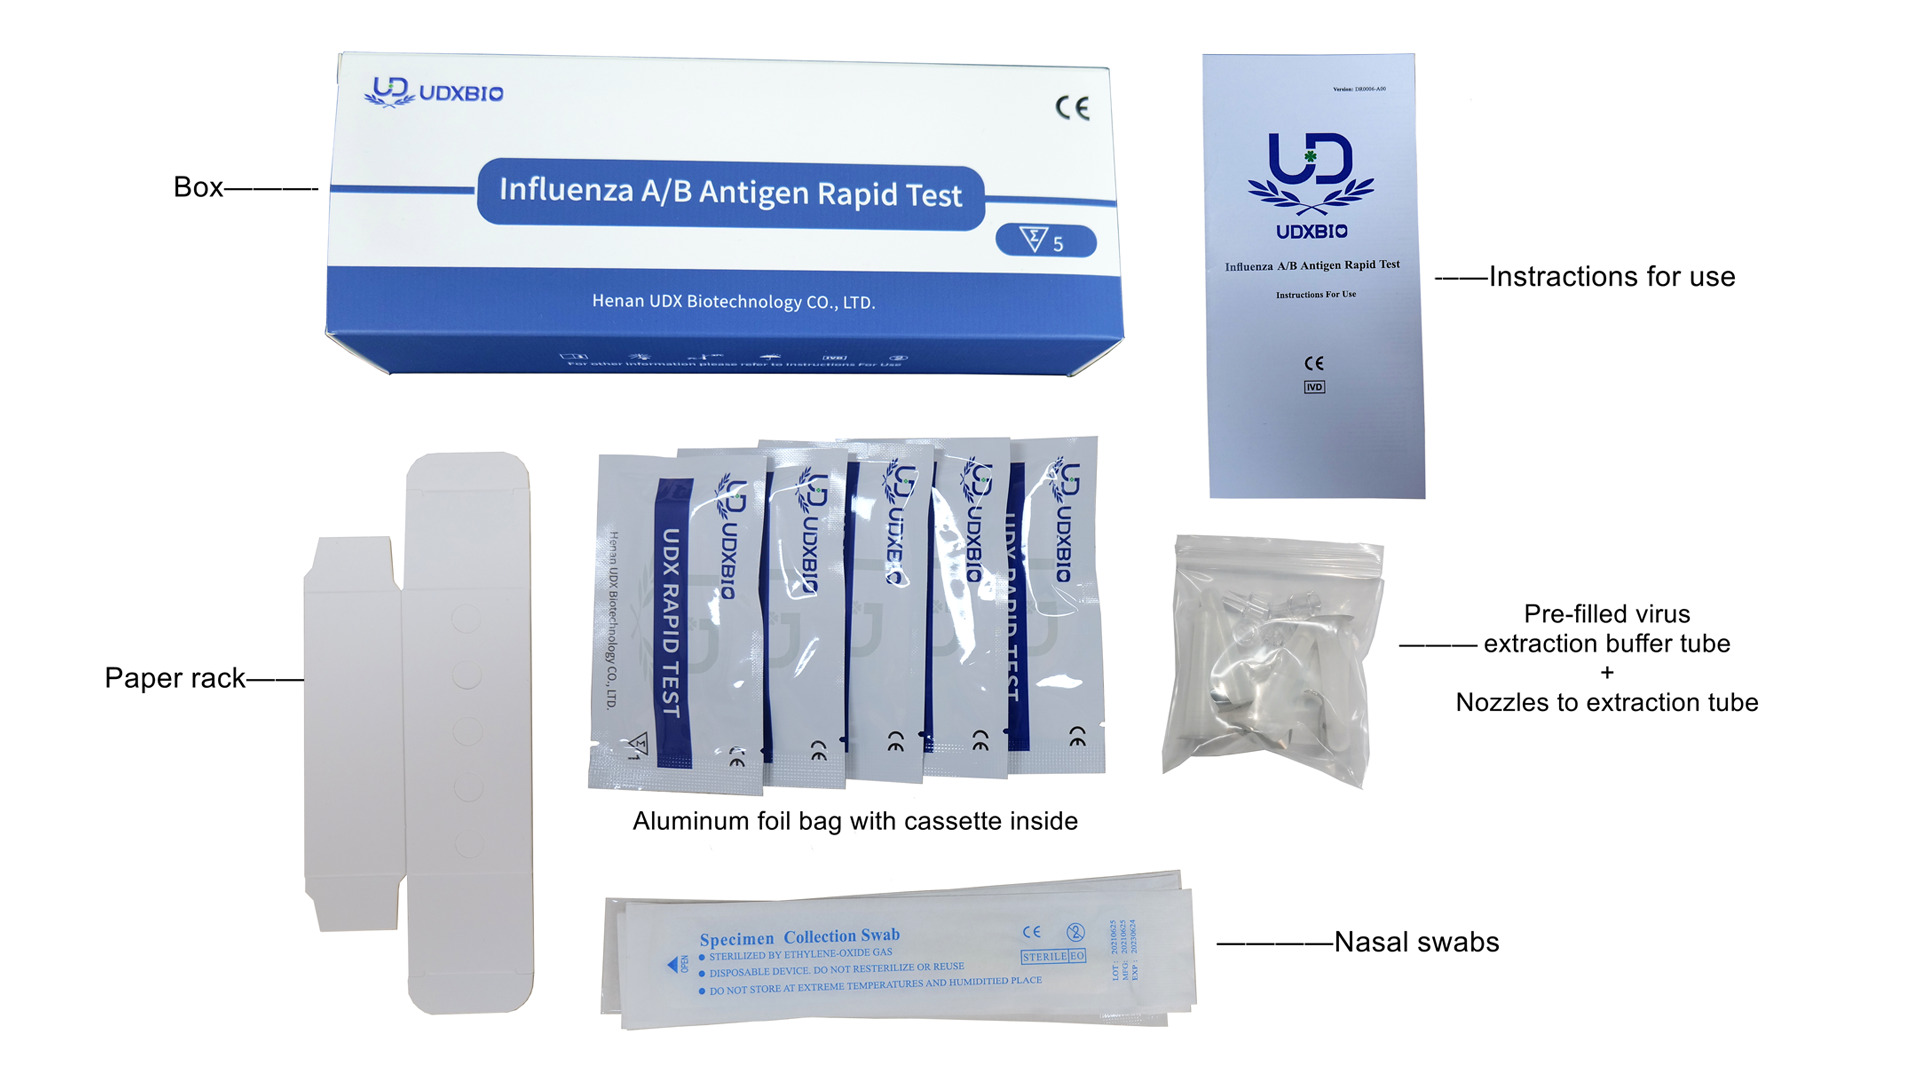 Overview And Accuracy of Influenza A/B Antigen Rapid Test